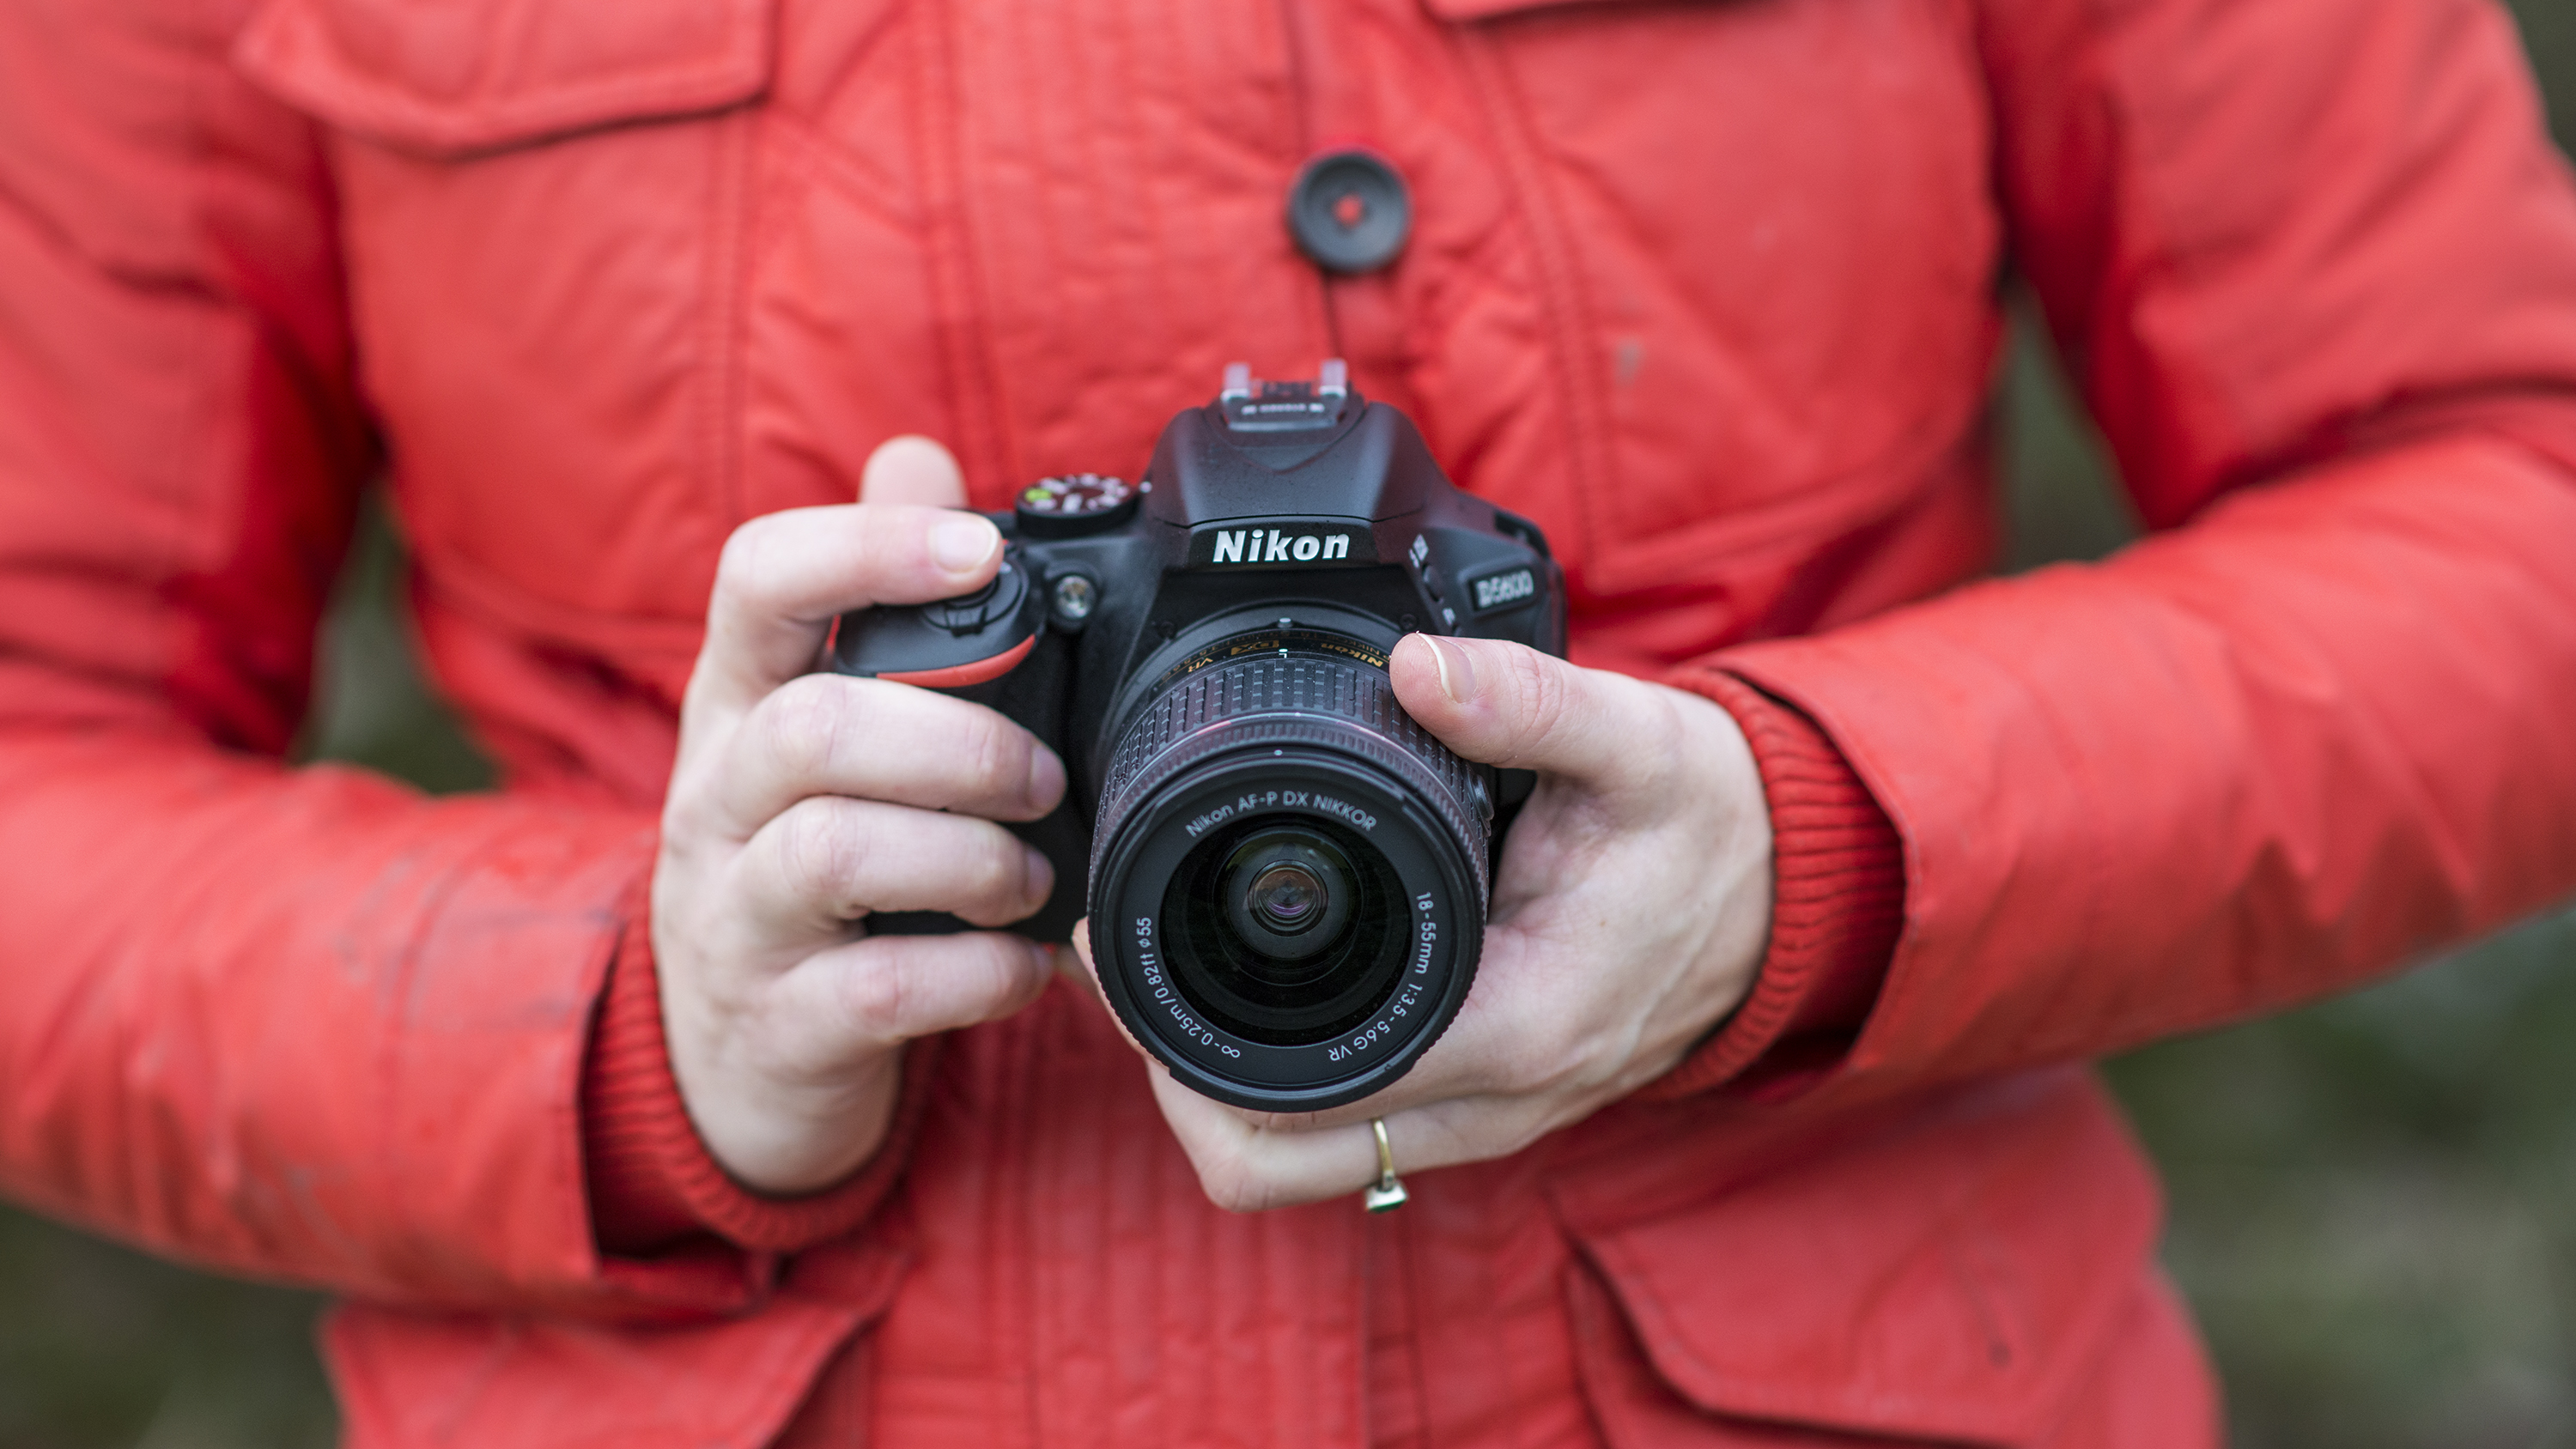 best DSLR camera Nikon D5600 being held by a person in a red jacket